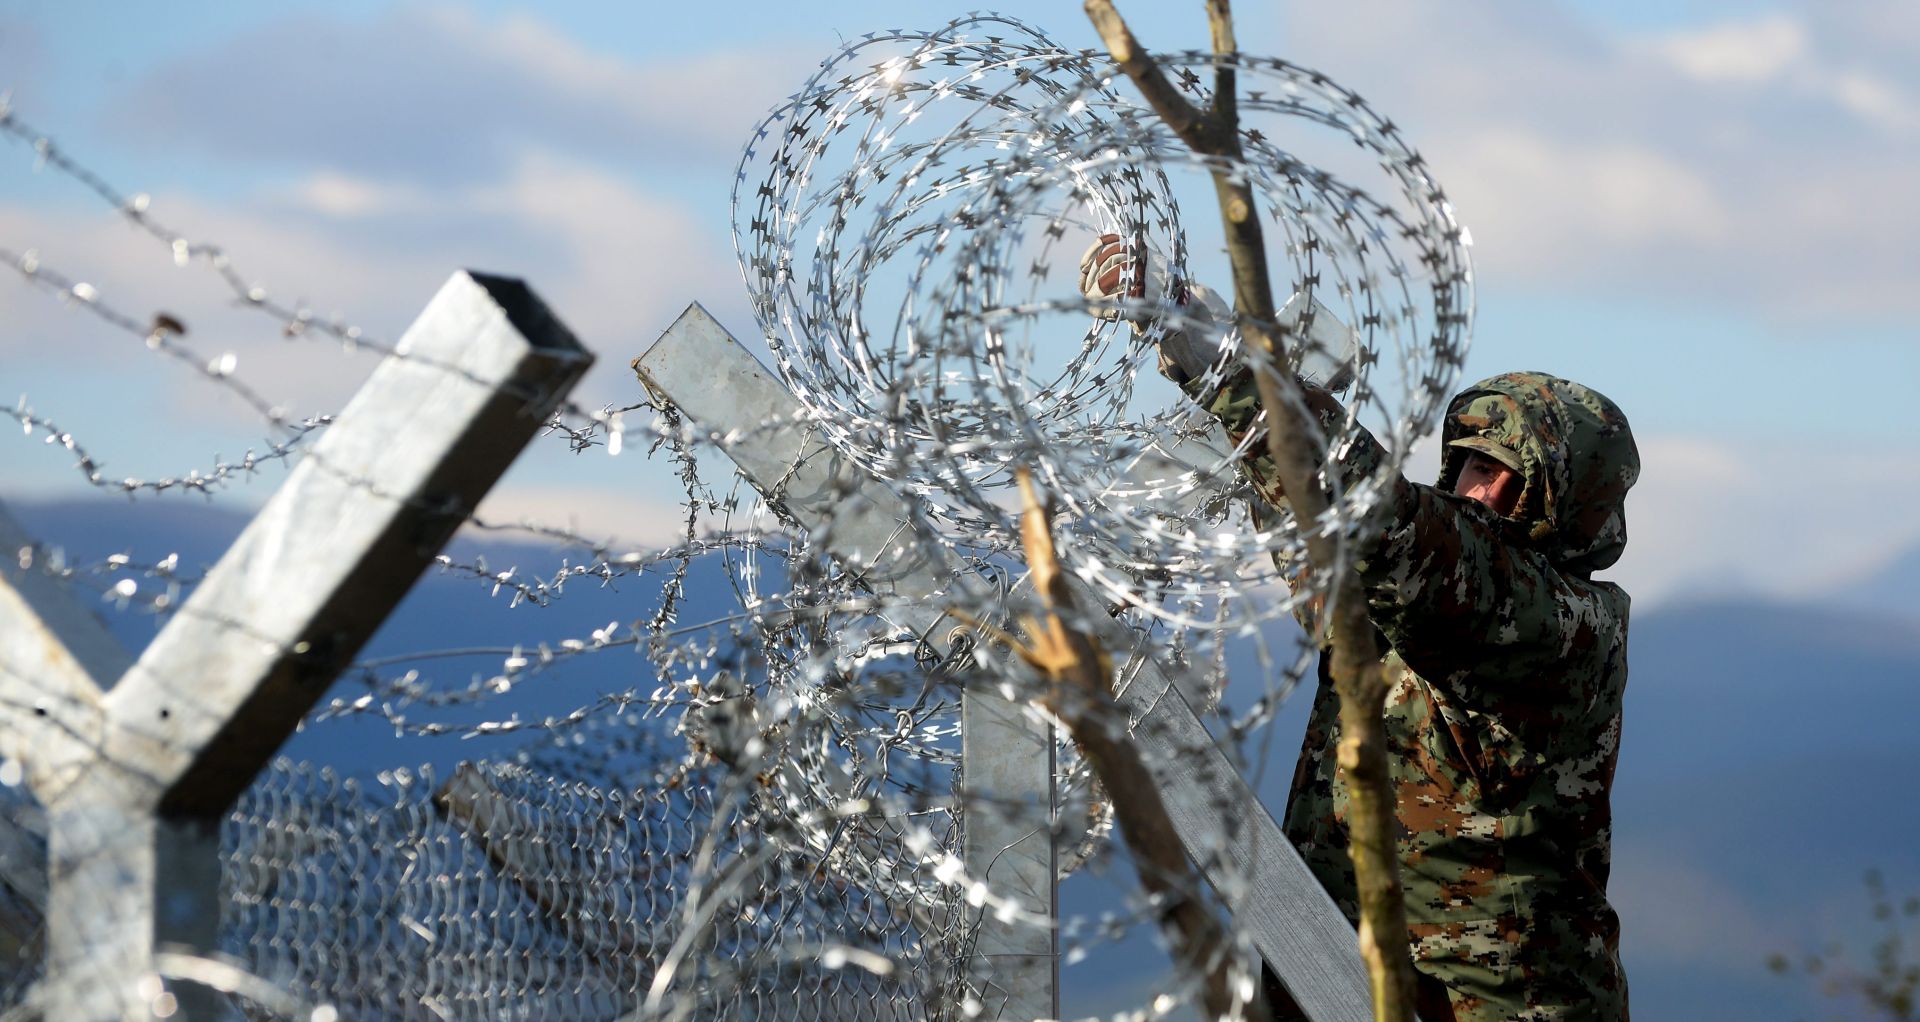 epa05046874 A Macedonian army soldier finish a razor-wired fence at the border with Greece, near Gevgelija, The Former Yugoslav Republic of Macedonia, 29 November 2015.  The Macedonian Army had on 16 November begun clearing terrain as it prepared the ground for a possible fence along the Greek border that would slow the flow of refugees crossing its terrain. The Macedonian army's engineering units started putting up the fence expected to be finished within 24 hours and to be over four kilometers long. Macedonian official state that the border will stay open and all the refugees that are from the regions overrun with military conflicts will be let through. Macedonia, Serbia and Croatia had started restricting access to migrants on the Balkan route to Syrians, Iraqis and Afghans. It is a part of a joint effort to reduce the number of asylum seekers streaming into the European Union.  EPA/NAKE BATEV